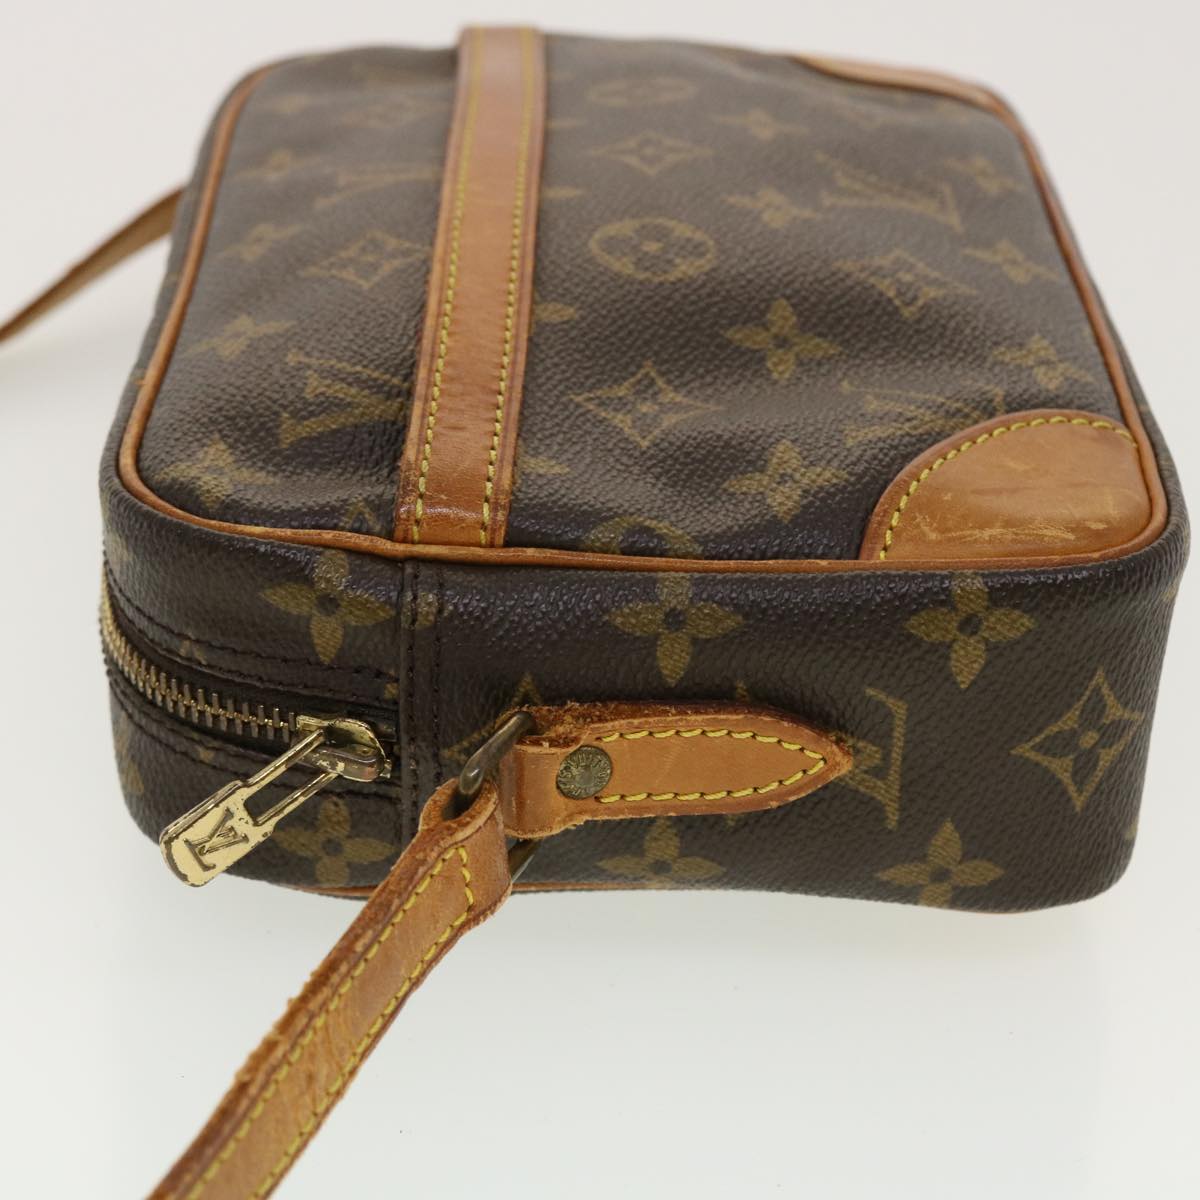 LOUIS VUITTON M51276 NO8903 MONOGRAM PATTERNED SHOULDER BAG MADE IN  FRANCE/ルイヴィトントロカデロモノグラム柄ショルダーバッグ